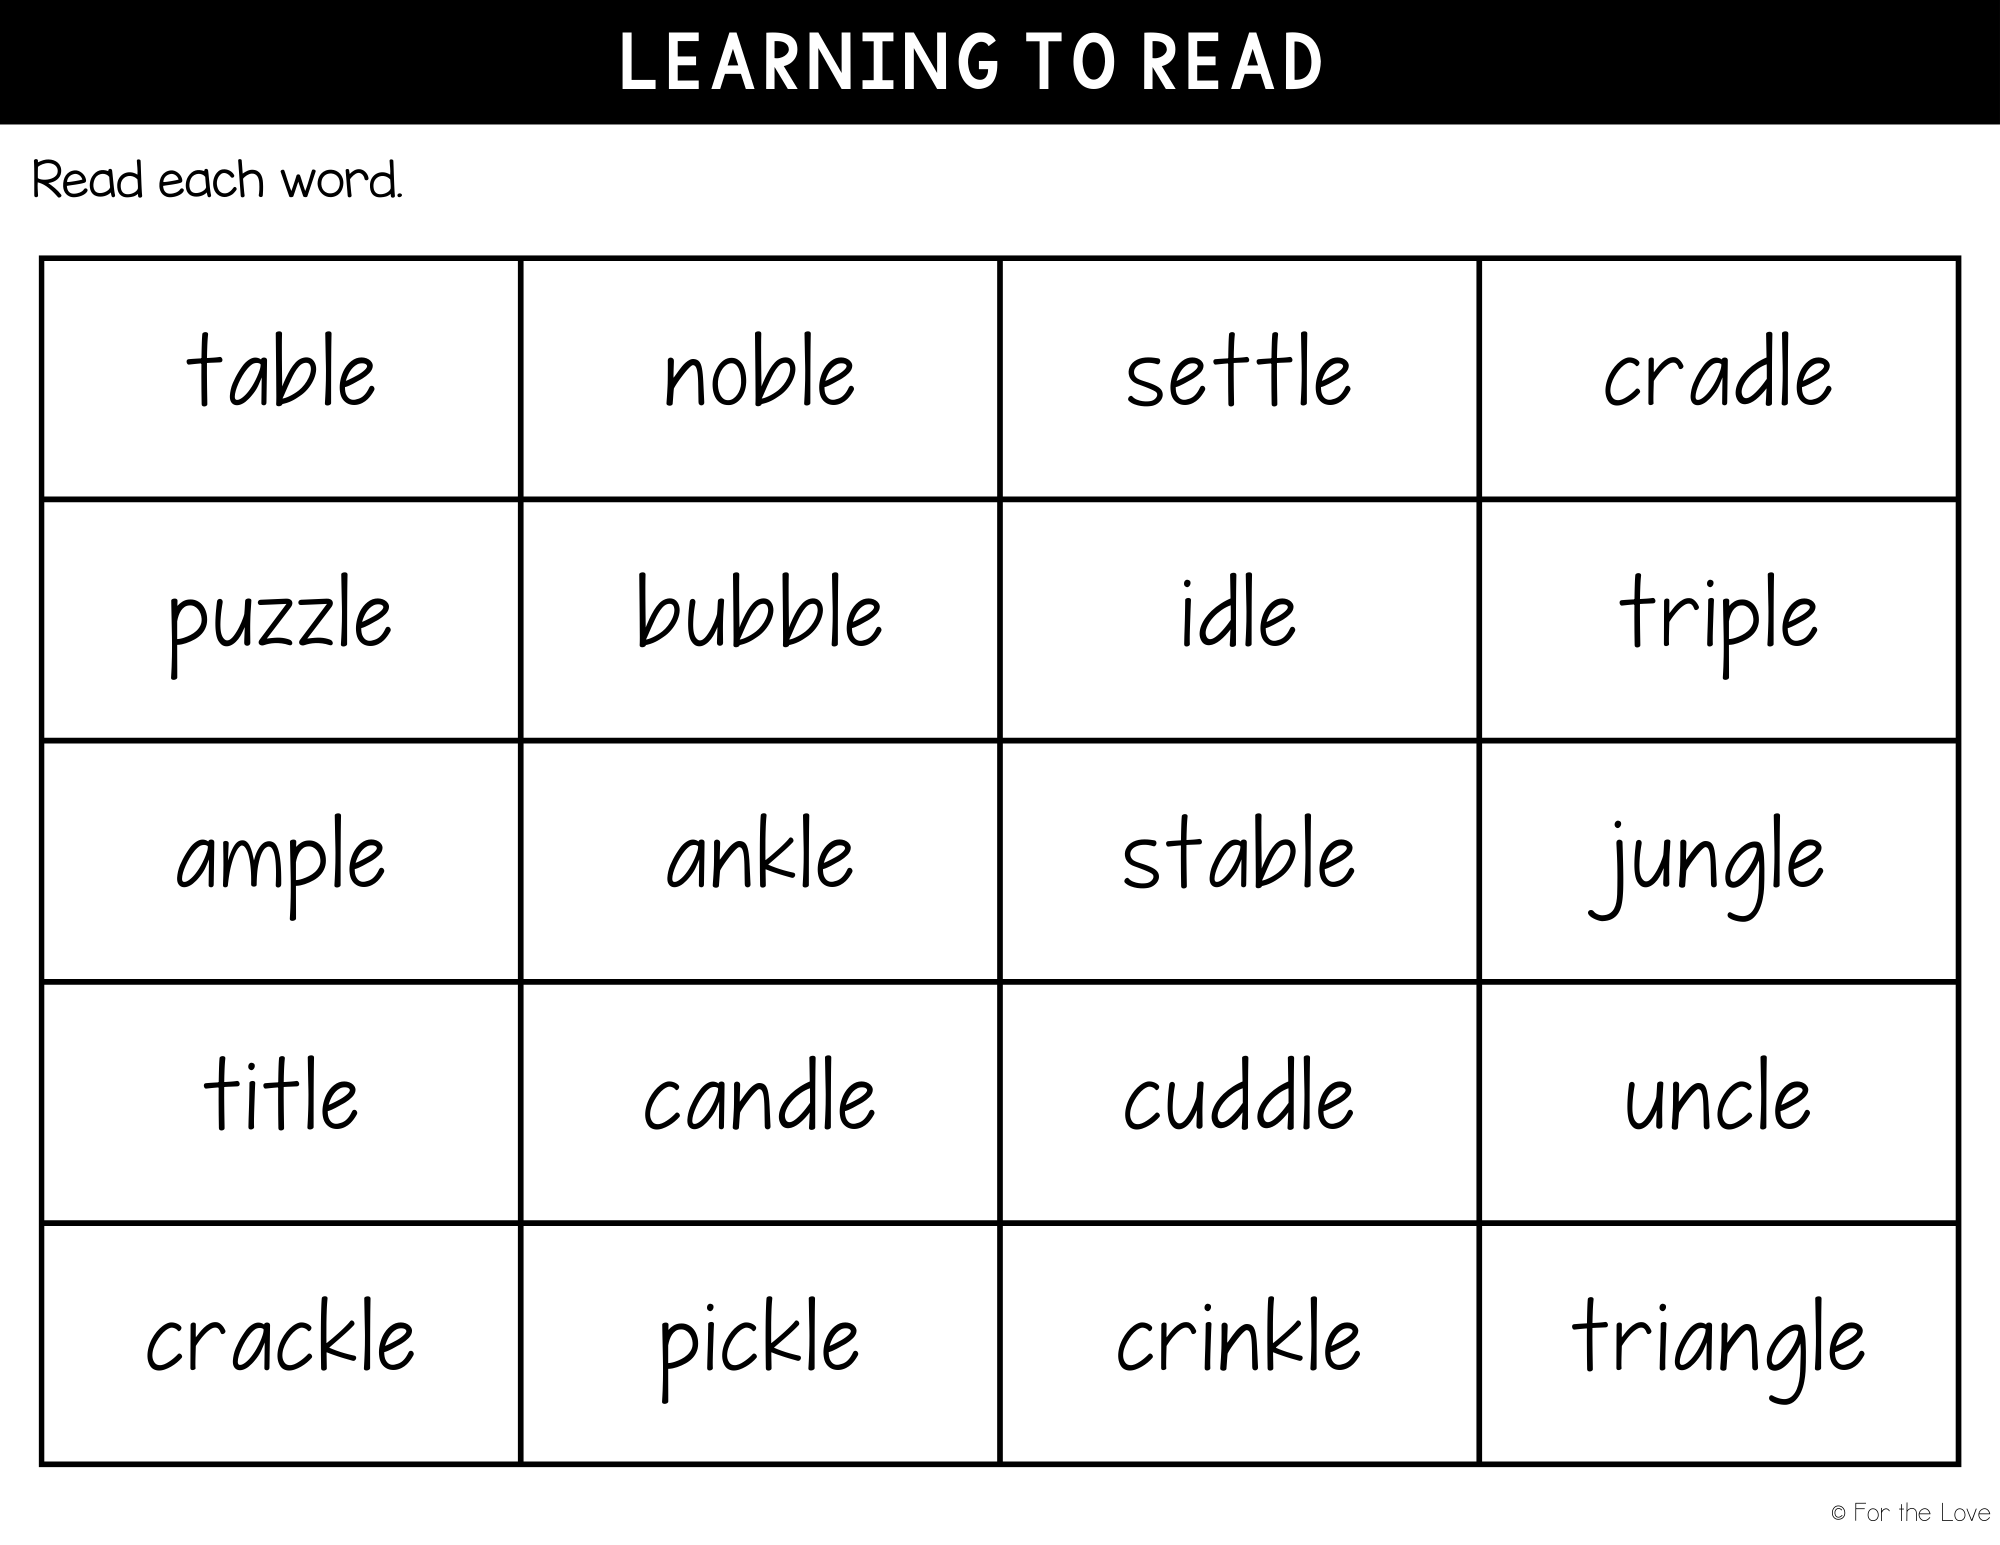 Practice reading words with the consonant + le final stable syllable.